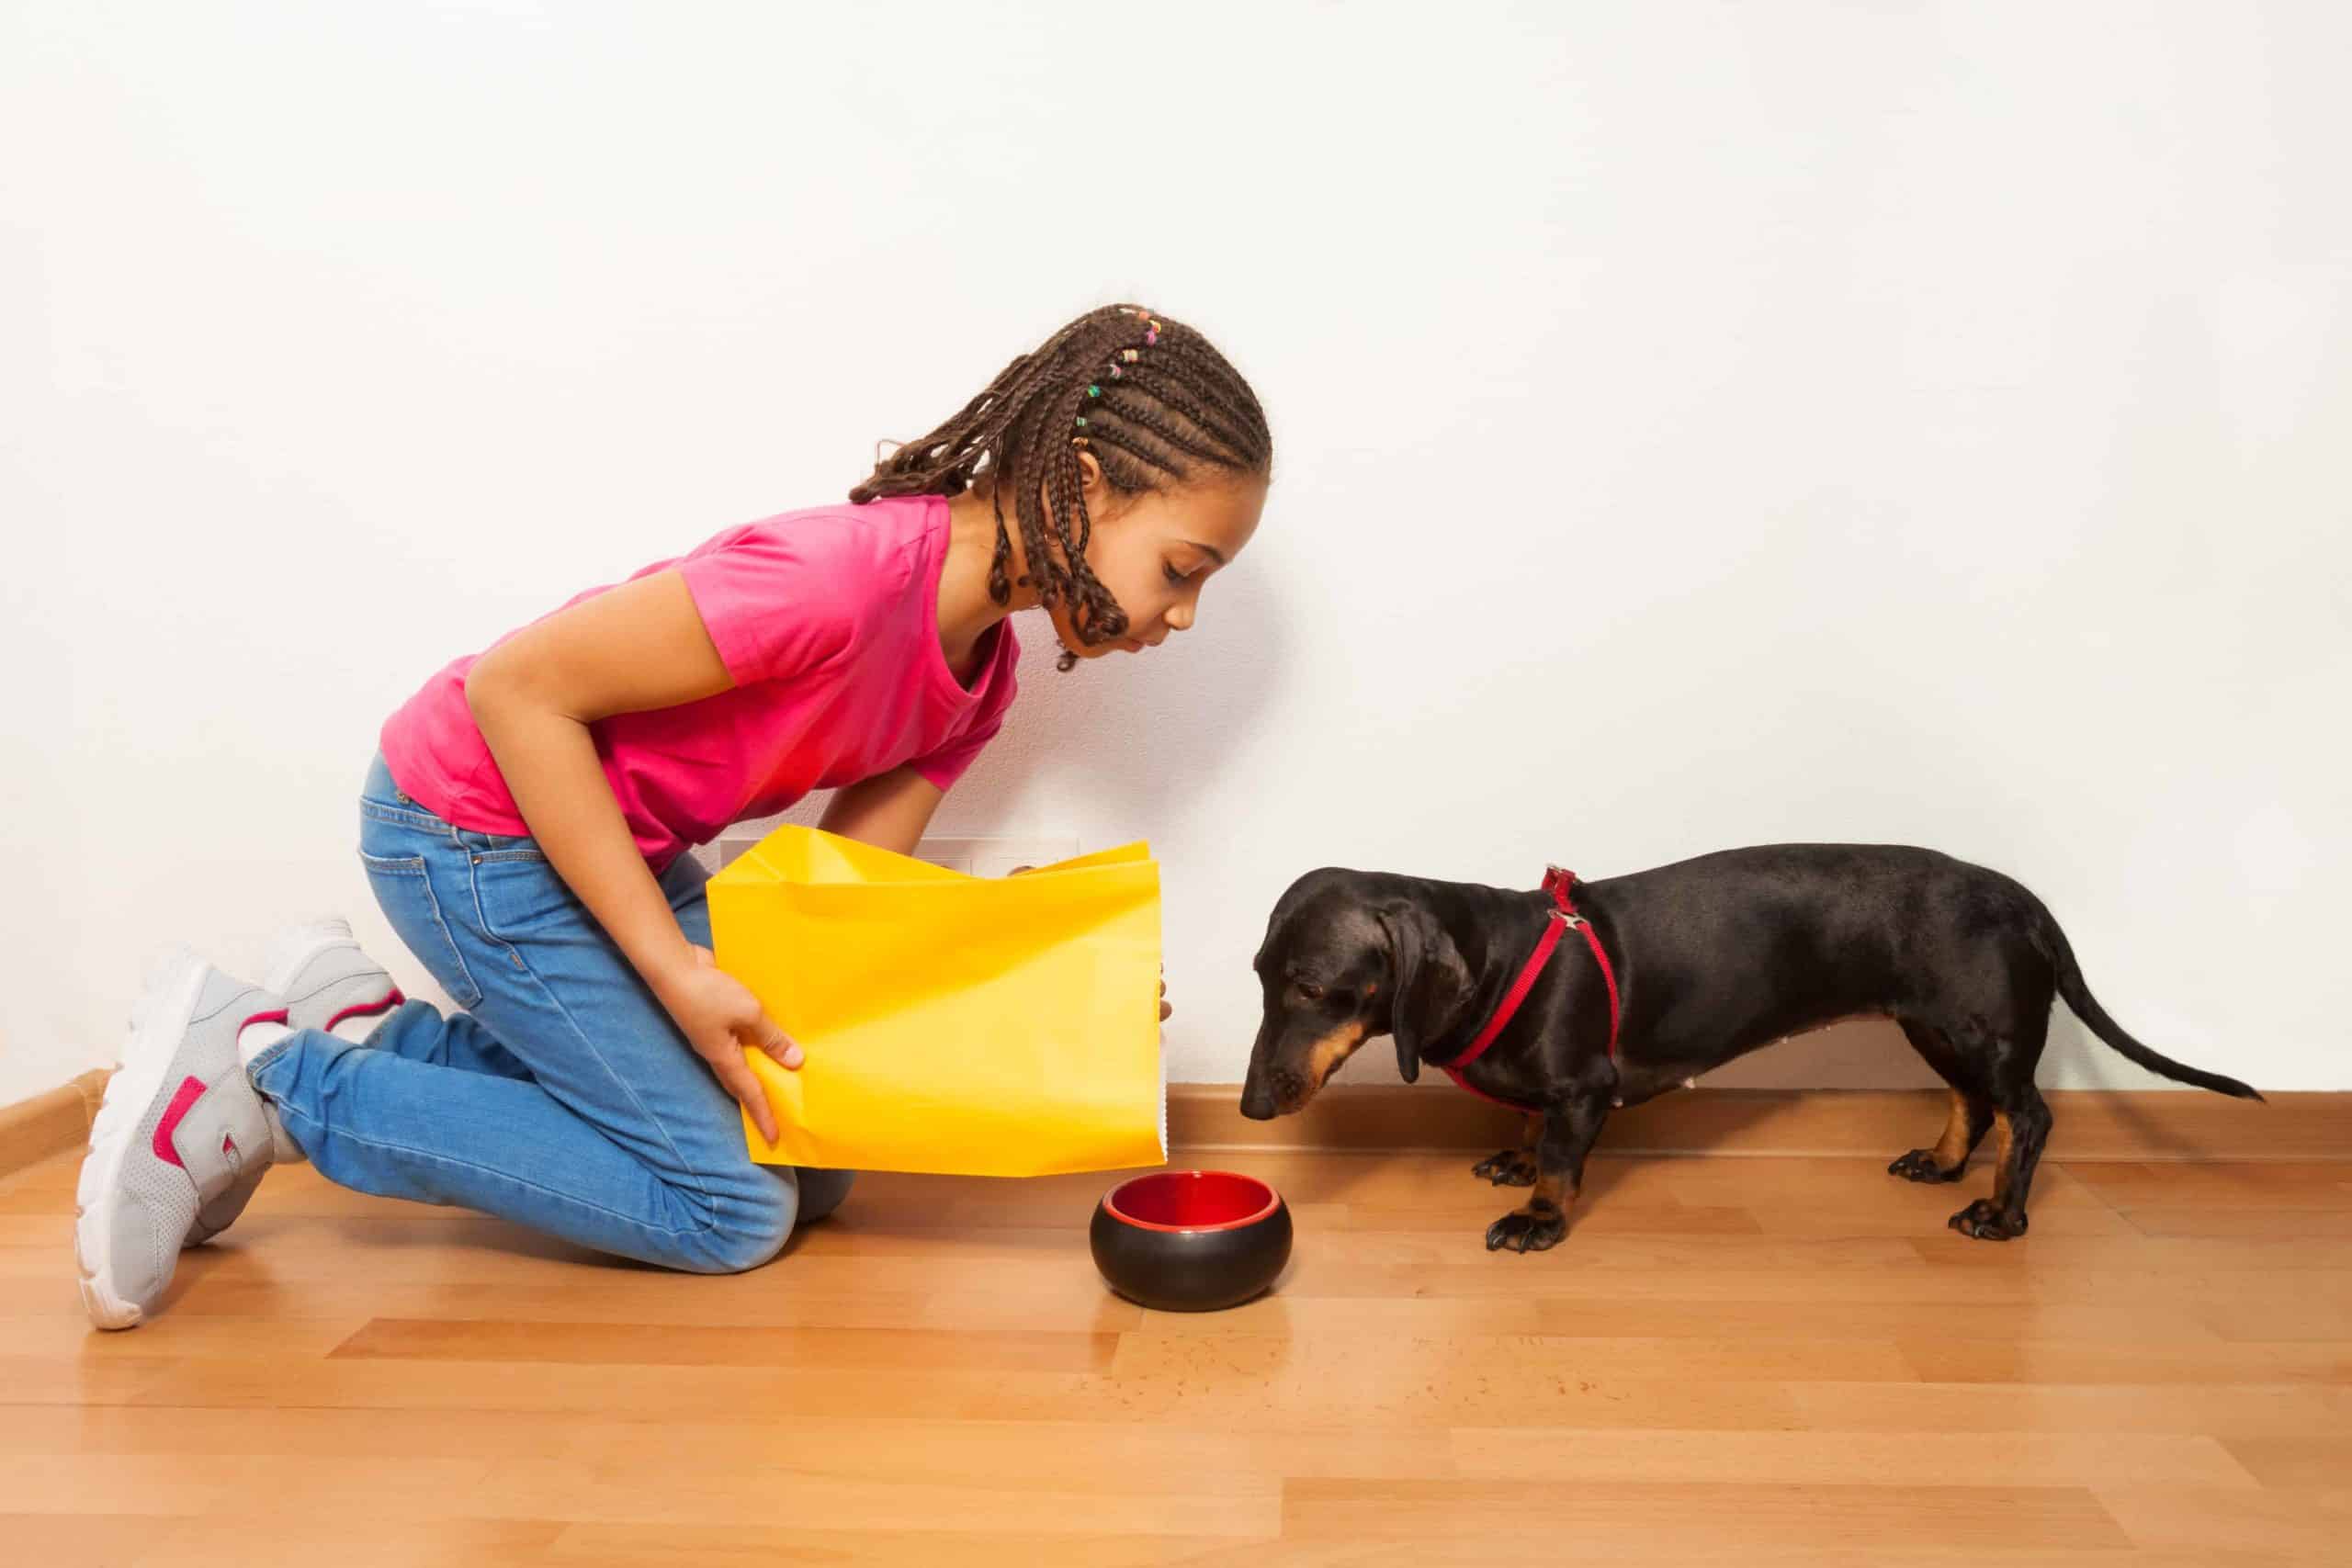 Girl pours food in Dachshund's bowl. The best way to avoid giving your dog wheat flour is to read the label on dog food or treats before purchasing. Wheat flour is one of the most common ingredients in pet food.